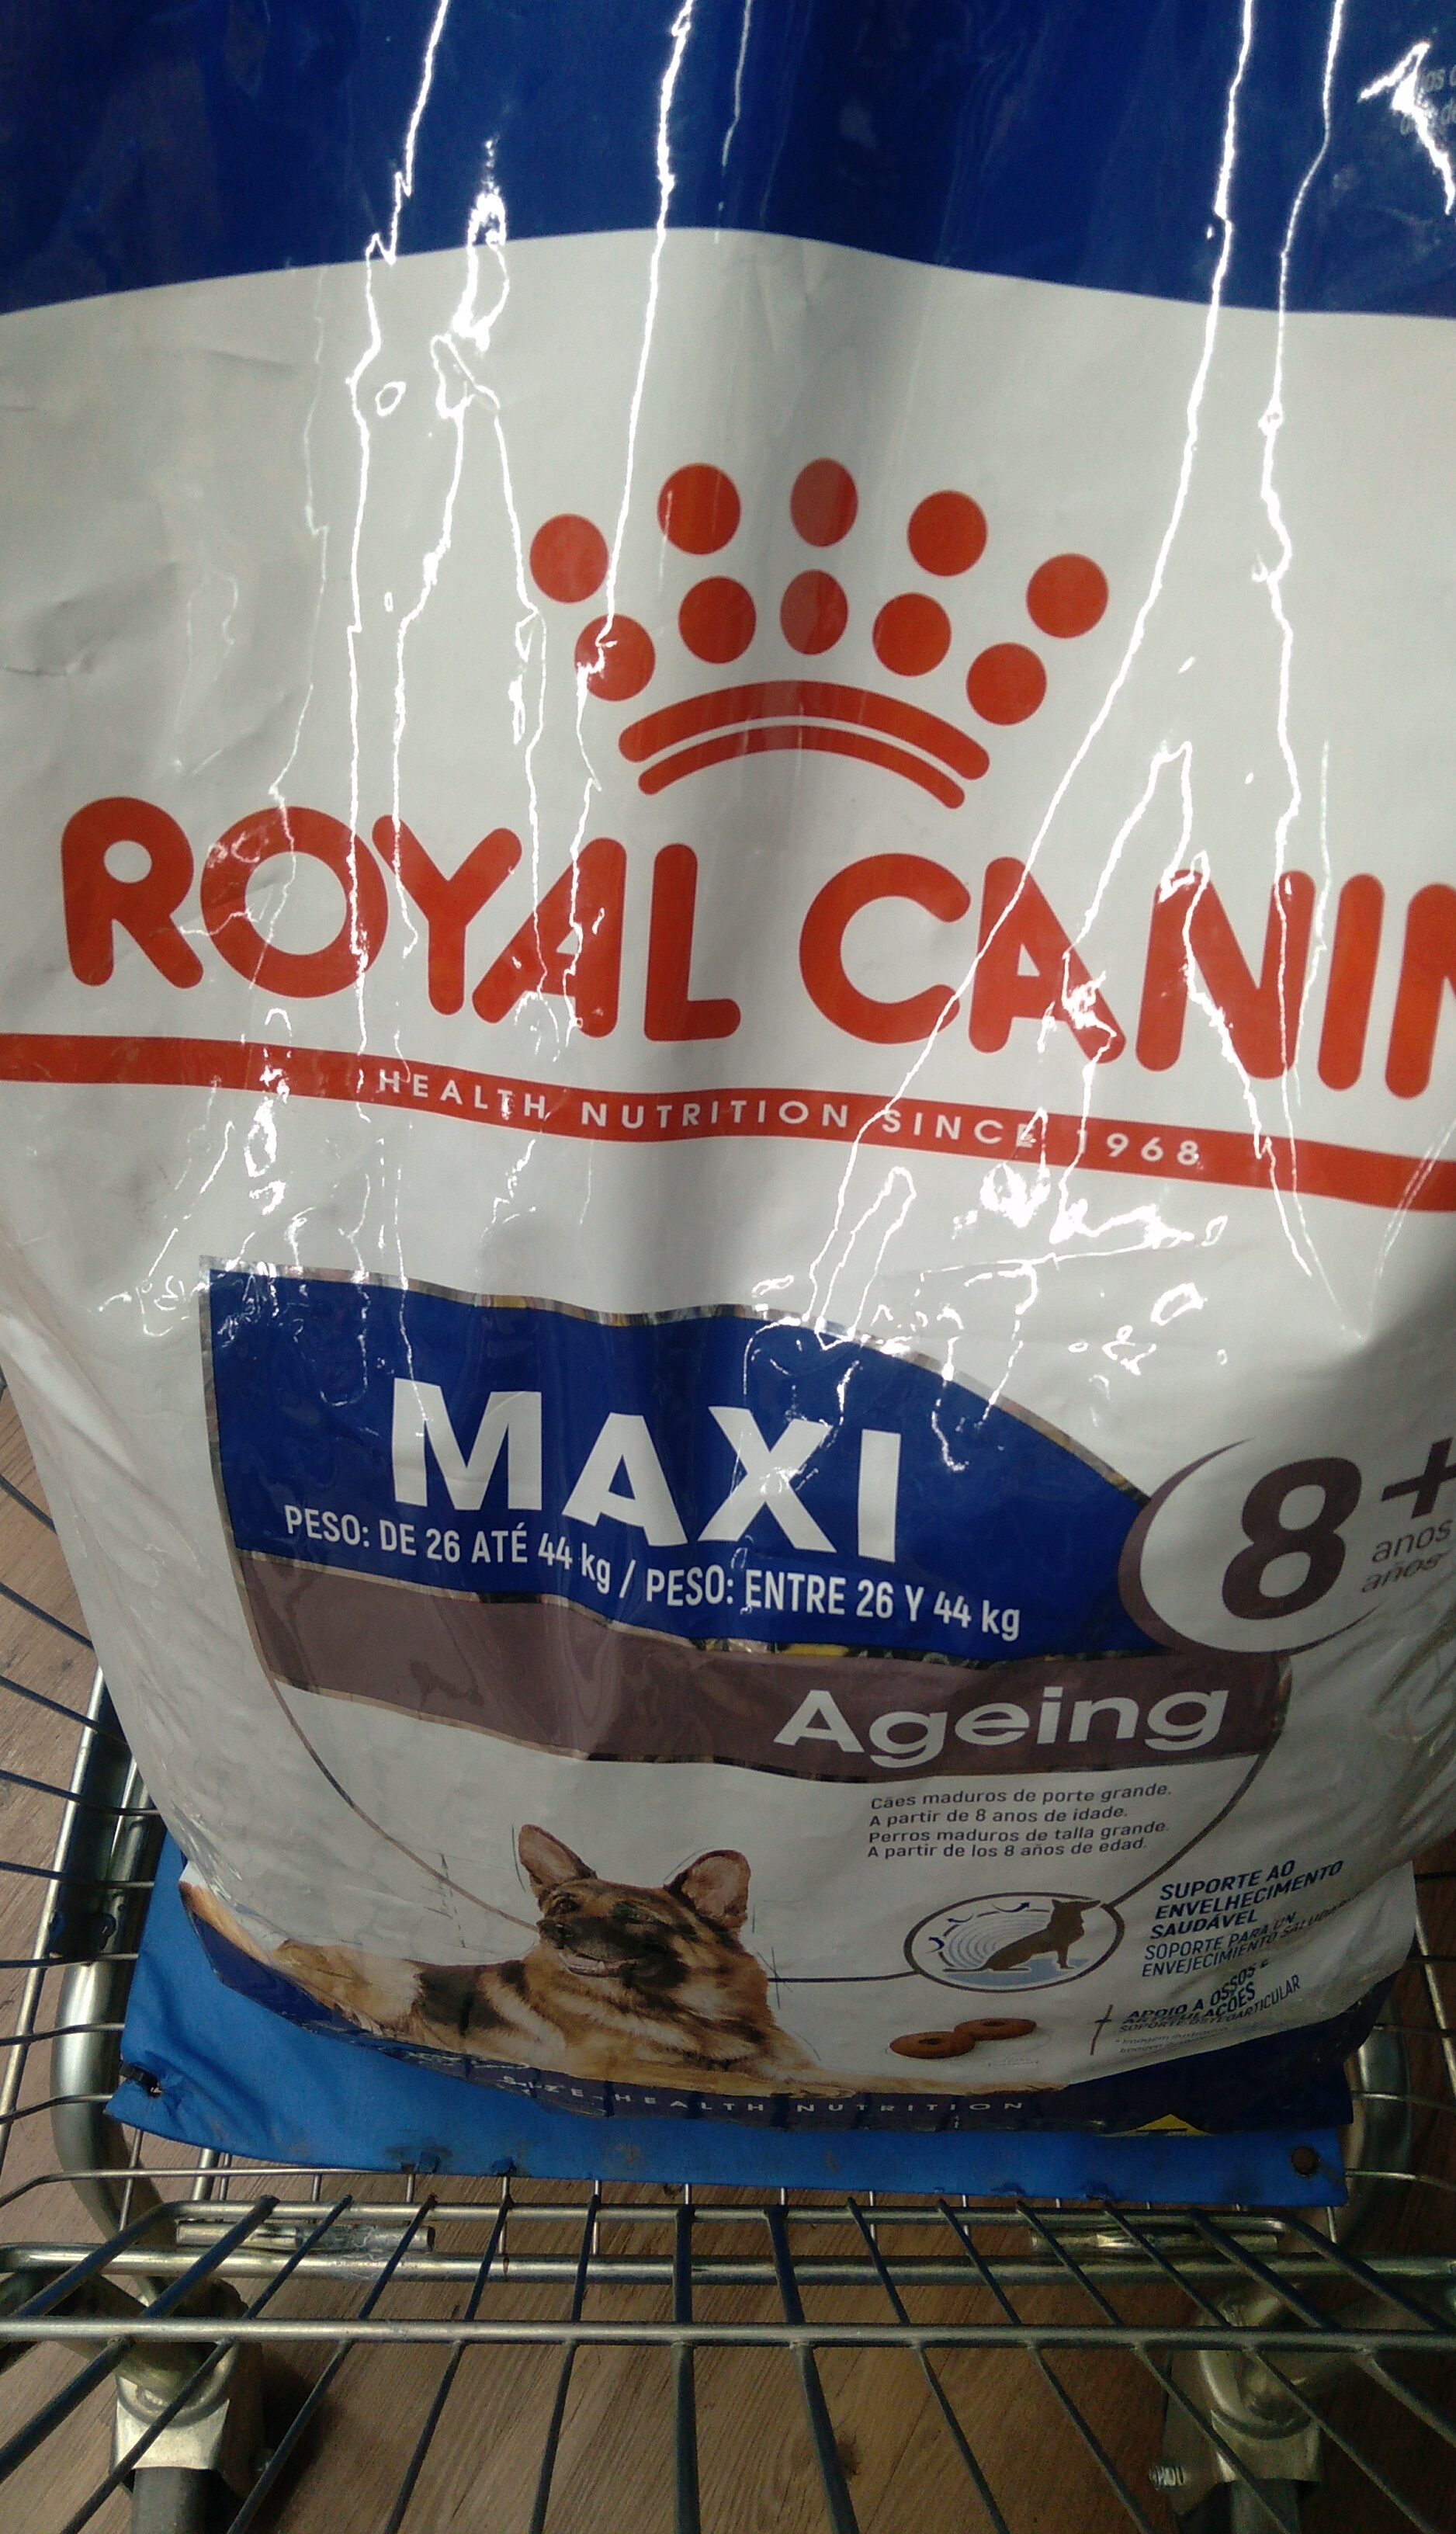 Royal Canin 15kg Maxi Ageing +8 - Product - pt